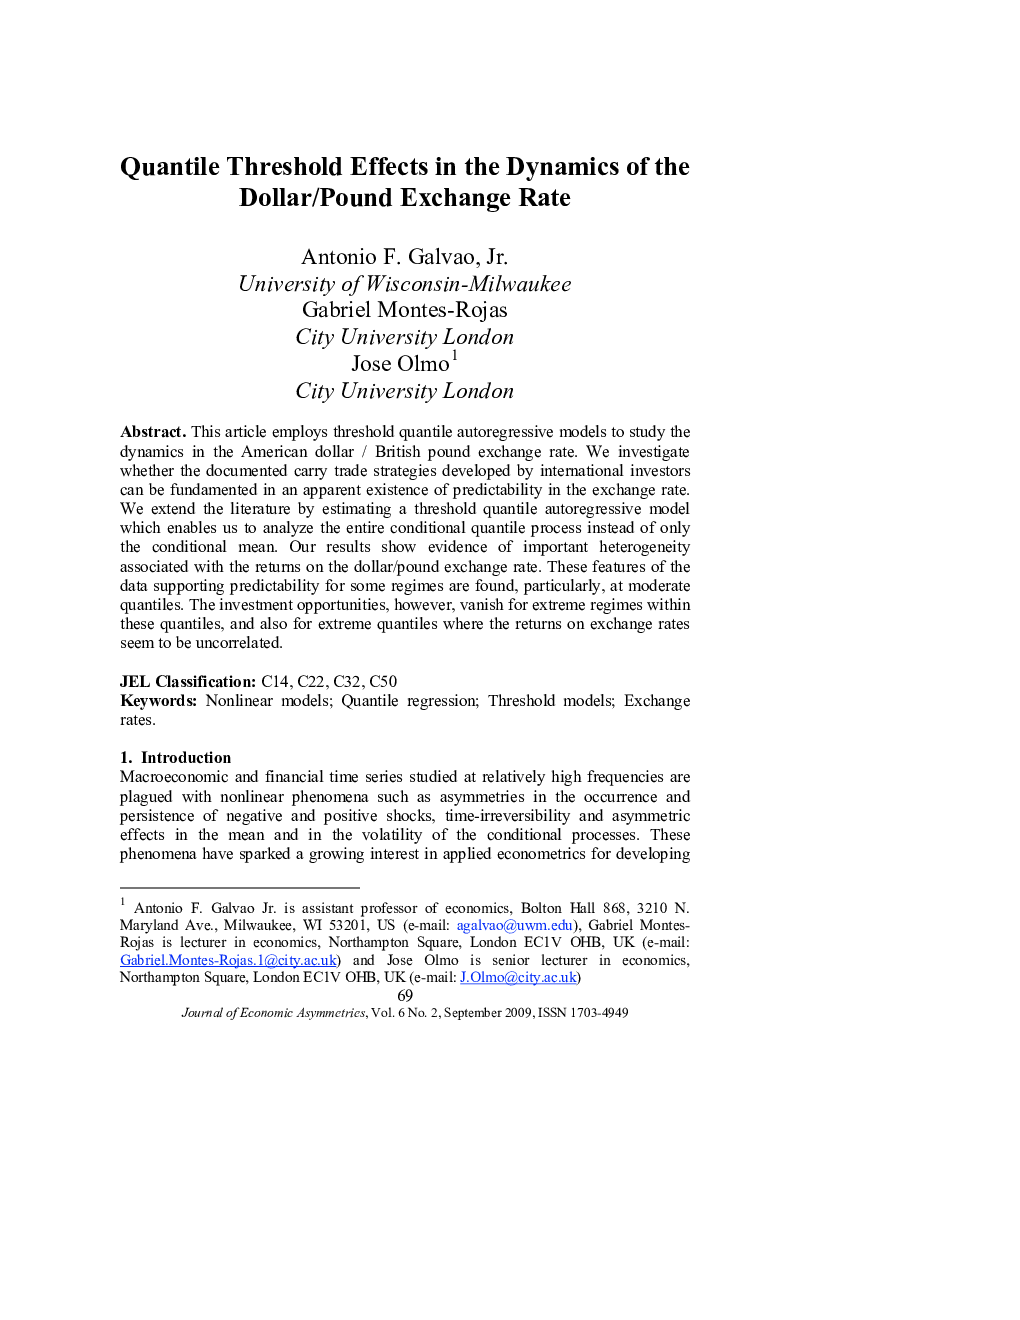 Quantile Threshold Effects in the Dynamics of the Dollar/Pound Exchange Rate